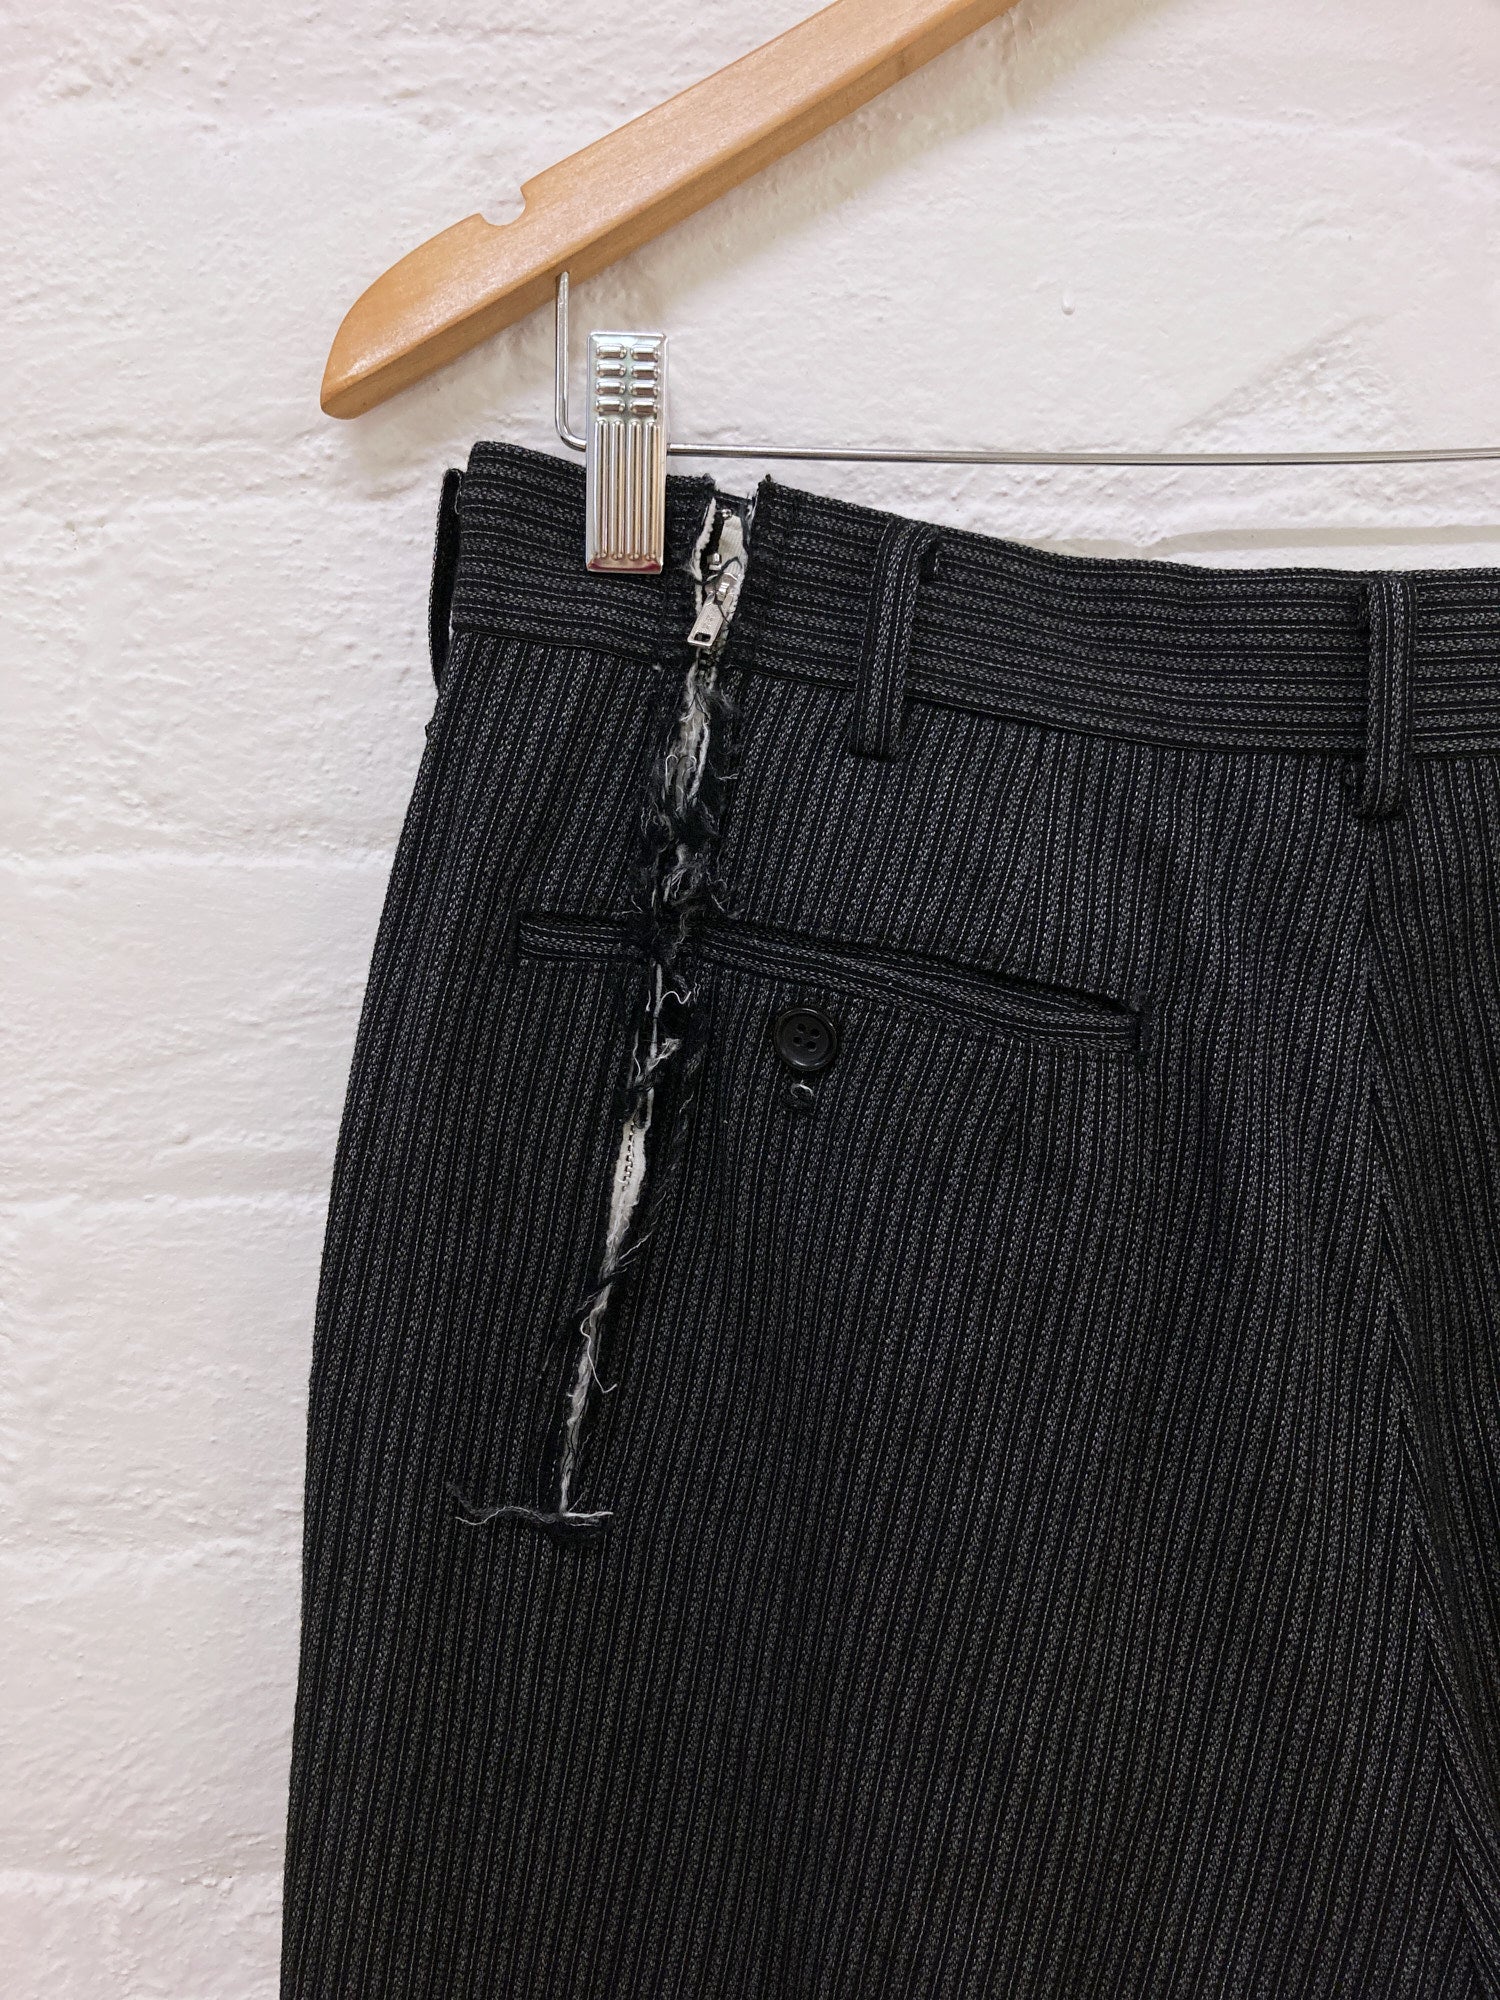 Comme des Garcons AW2004 striped wool cropped trousers with back waist zip - S M